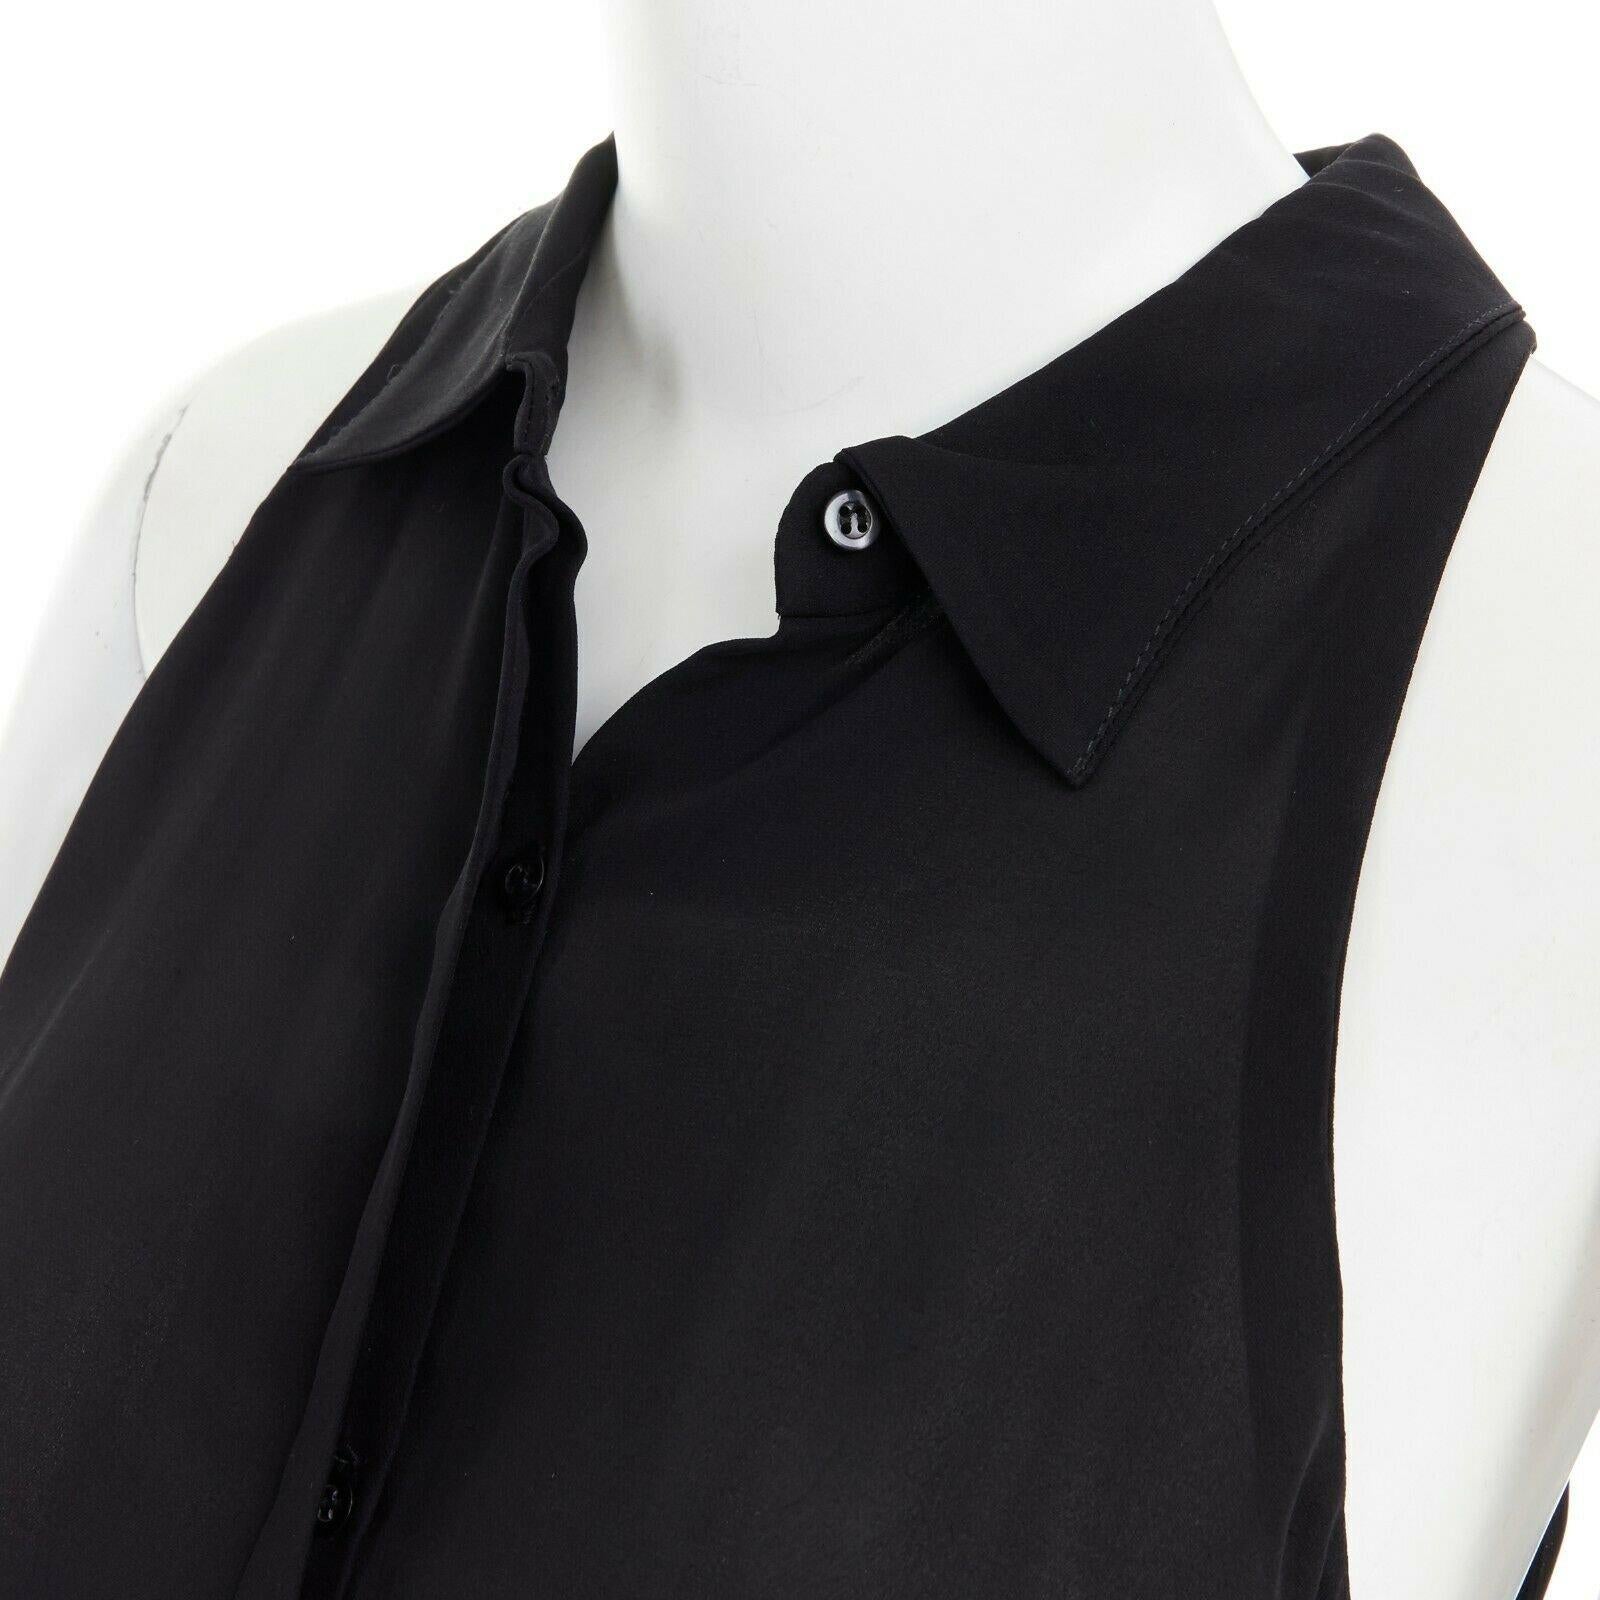 Women's ALC black 100% washed silk spread collar button front sleeveless shirt top XS